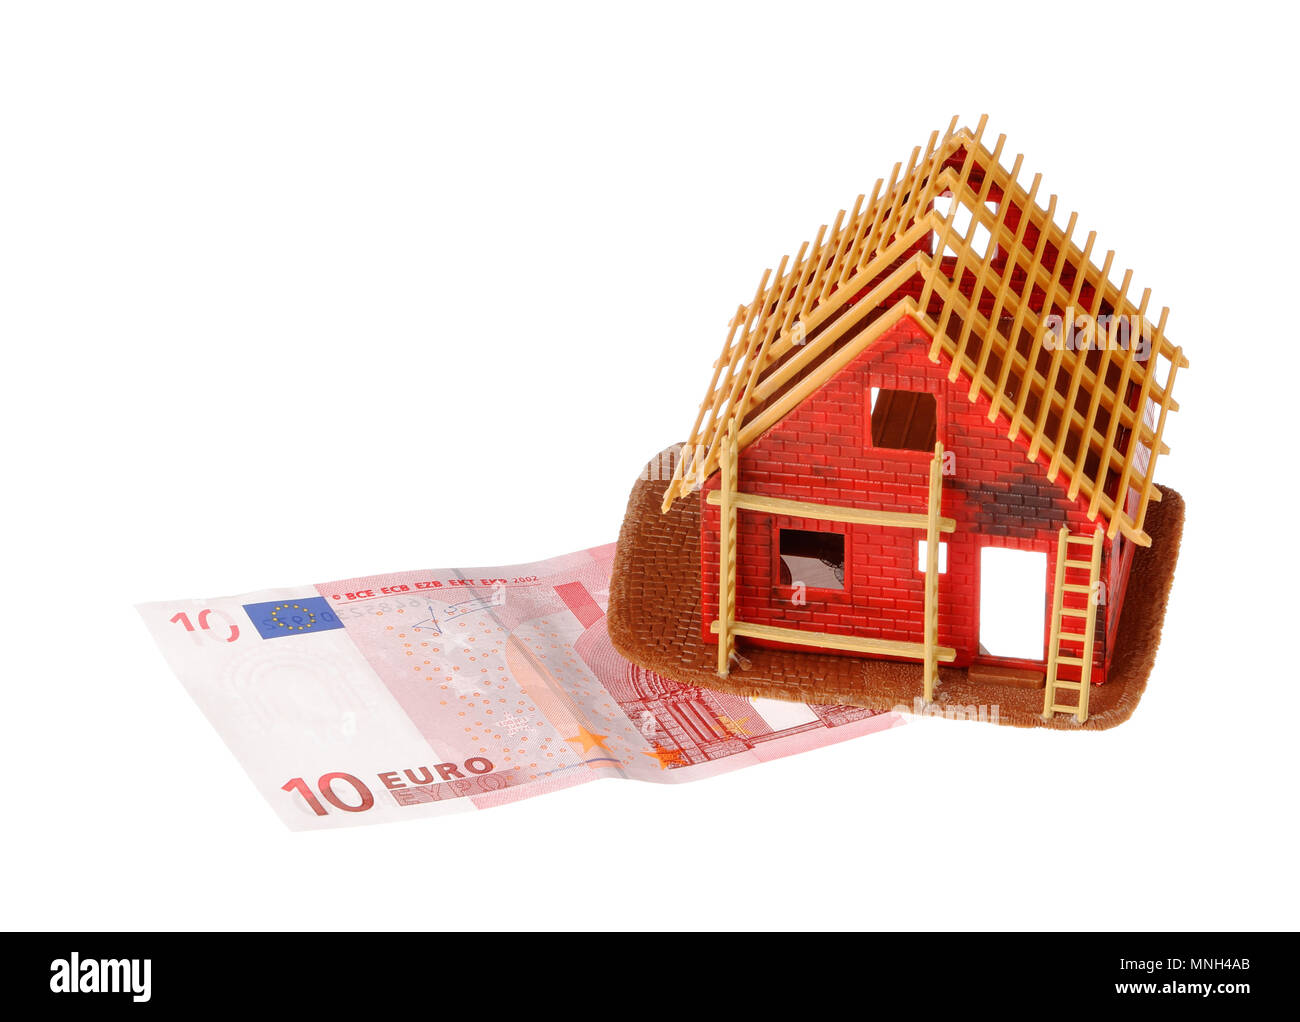 Stockholm, Sweden - November 27, 2017: A small red house being built on a 10 euro banknote isolated on white background. Stock Photo